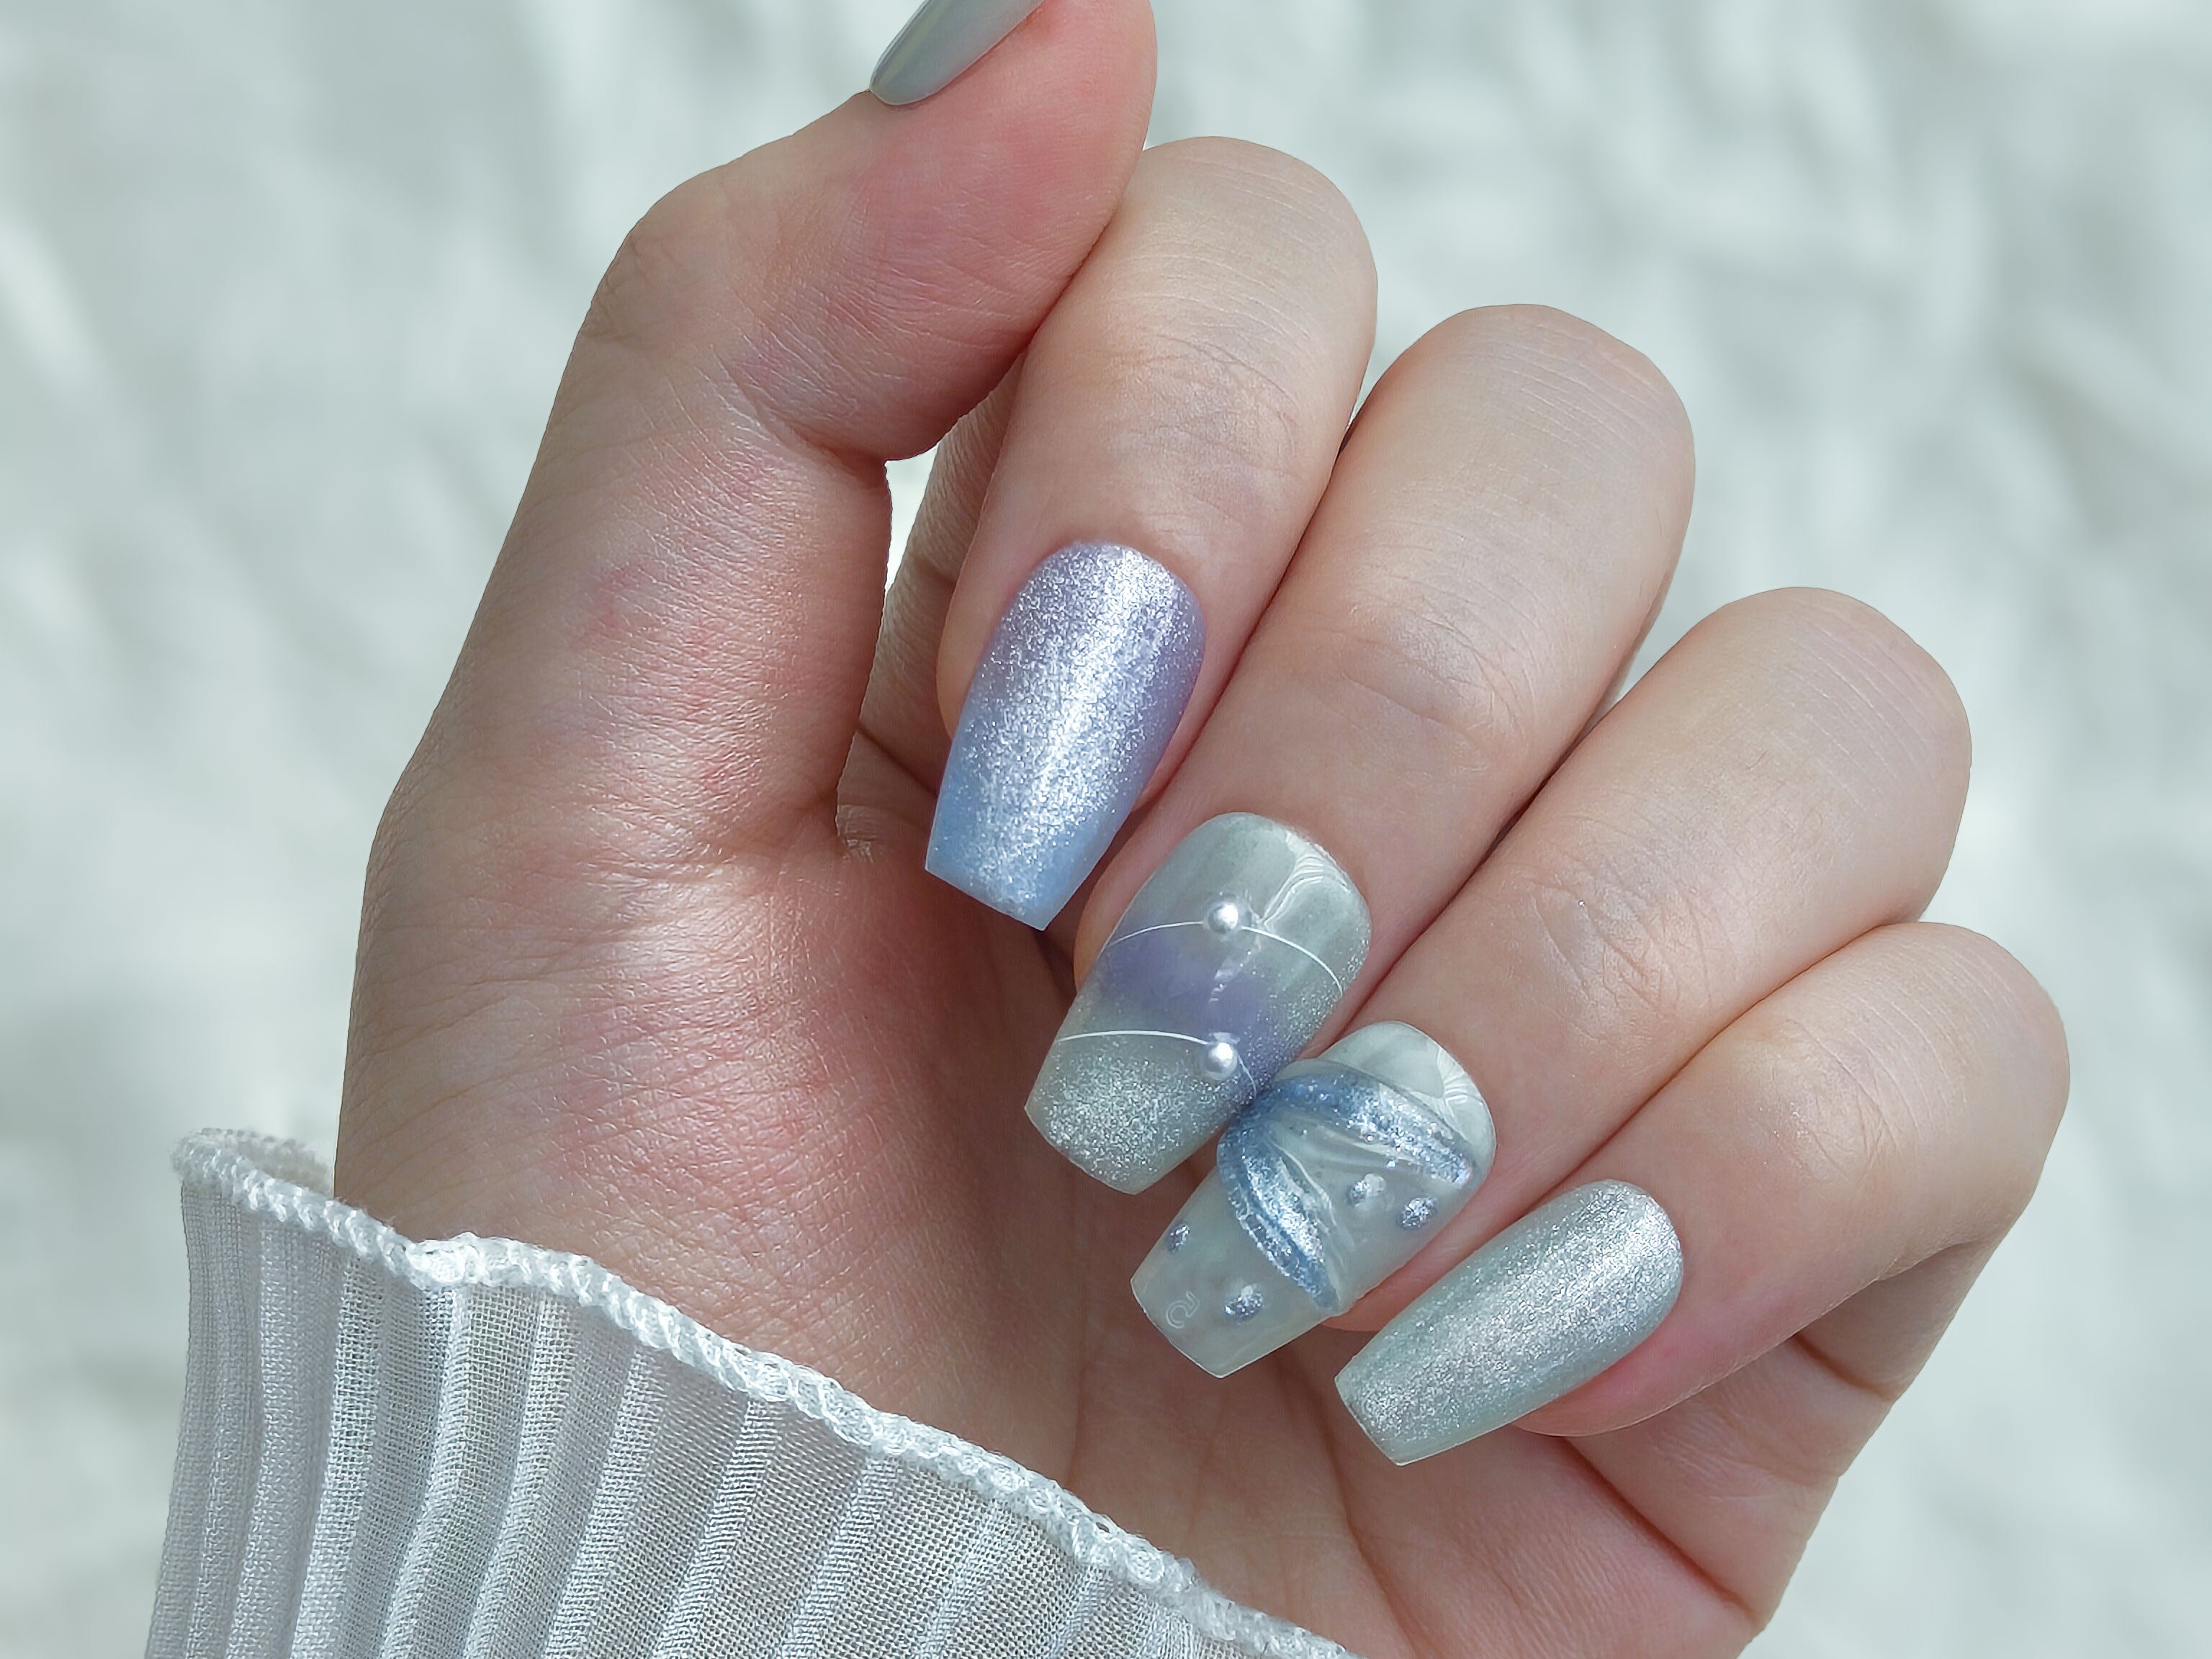 on hand photo of a Handmade Middle Coffin blue Mermaid Nails from Snaptips